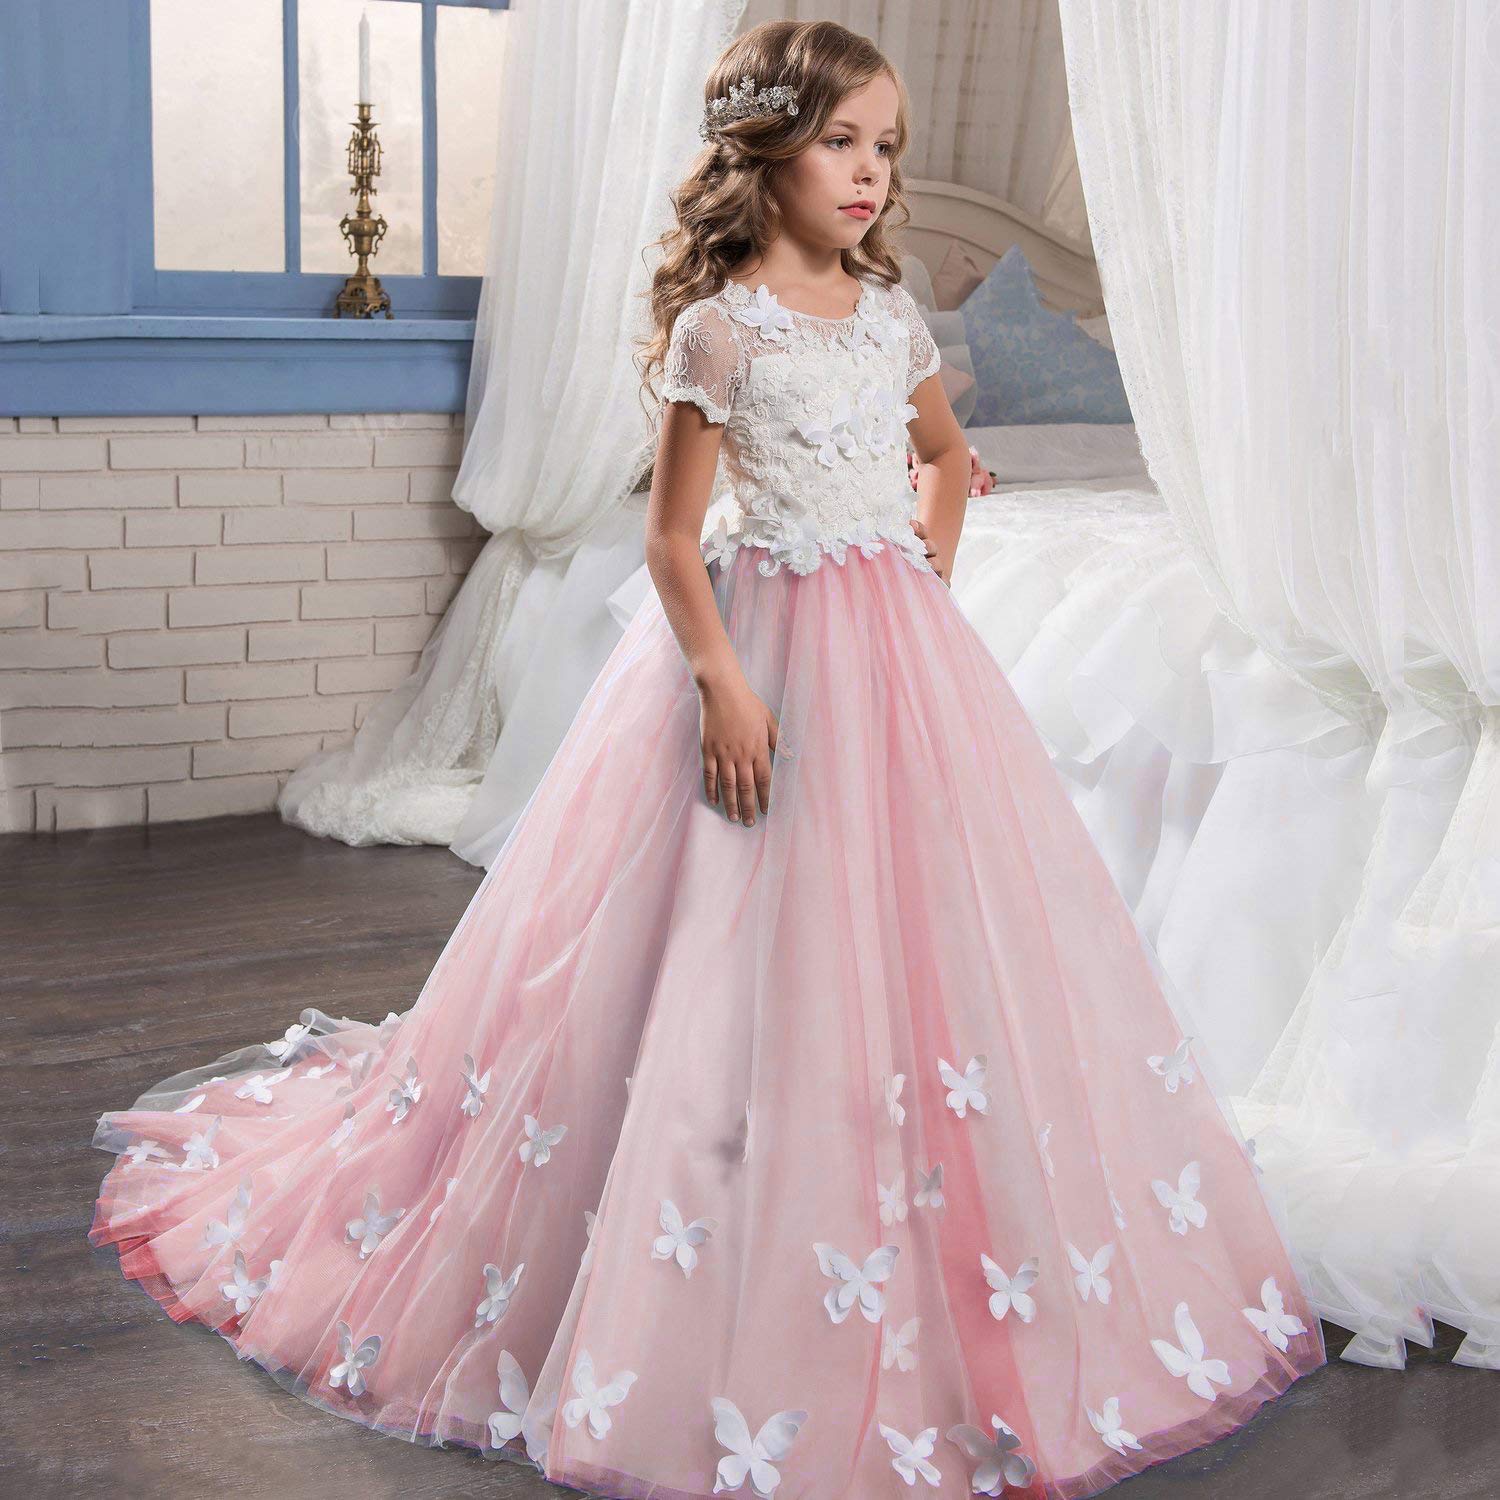 Butterfly  Flower Girl Dress Fancy Tulle Lace Short Sleeved Pageant Dress princess dress Ball Gown Princess Girl Birthday Dresses